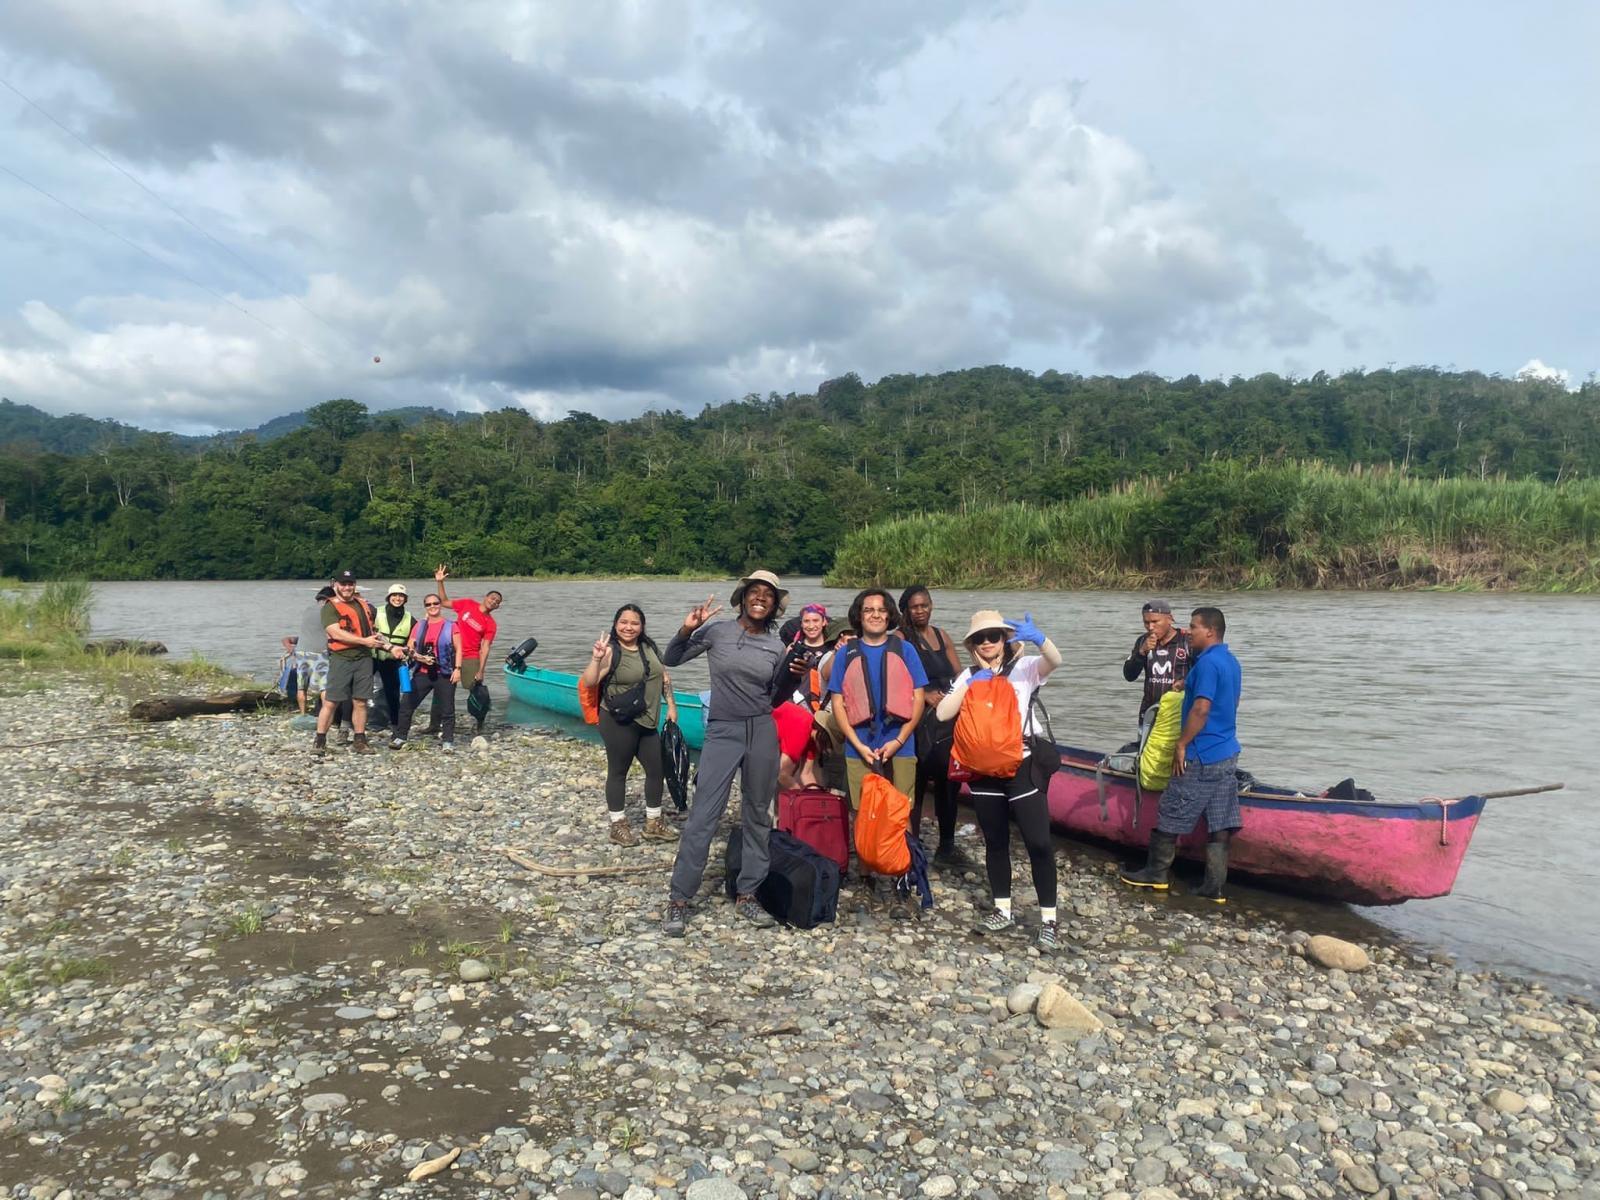 Students beside kayak on river through jungle